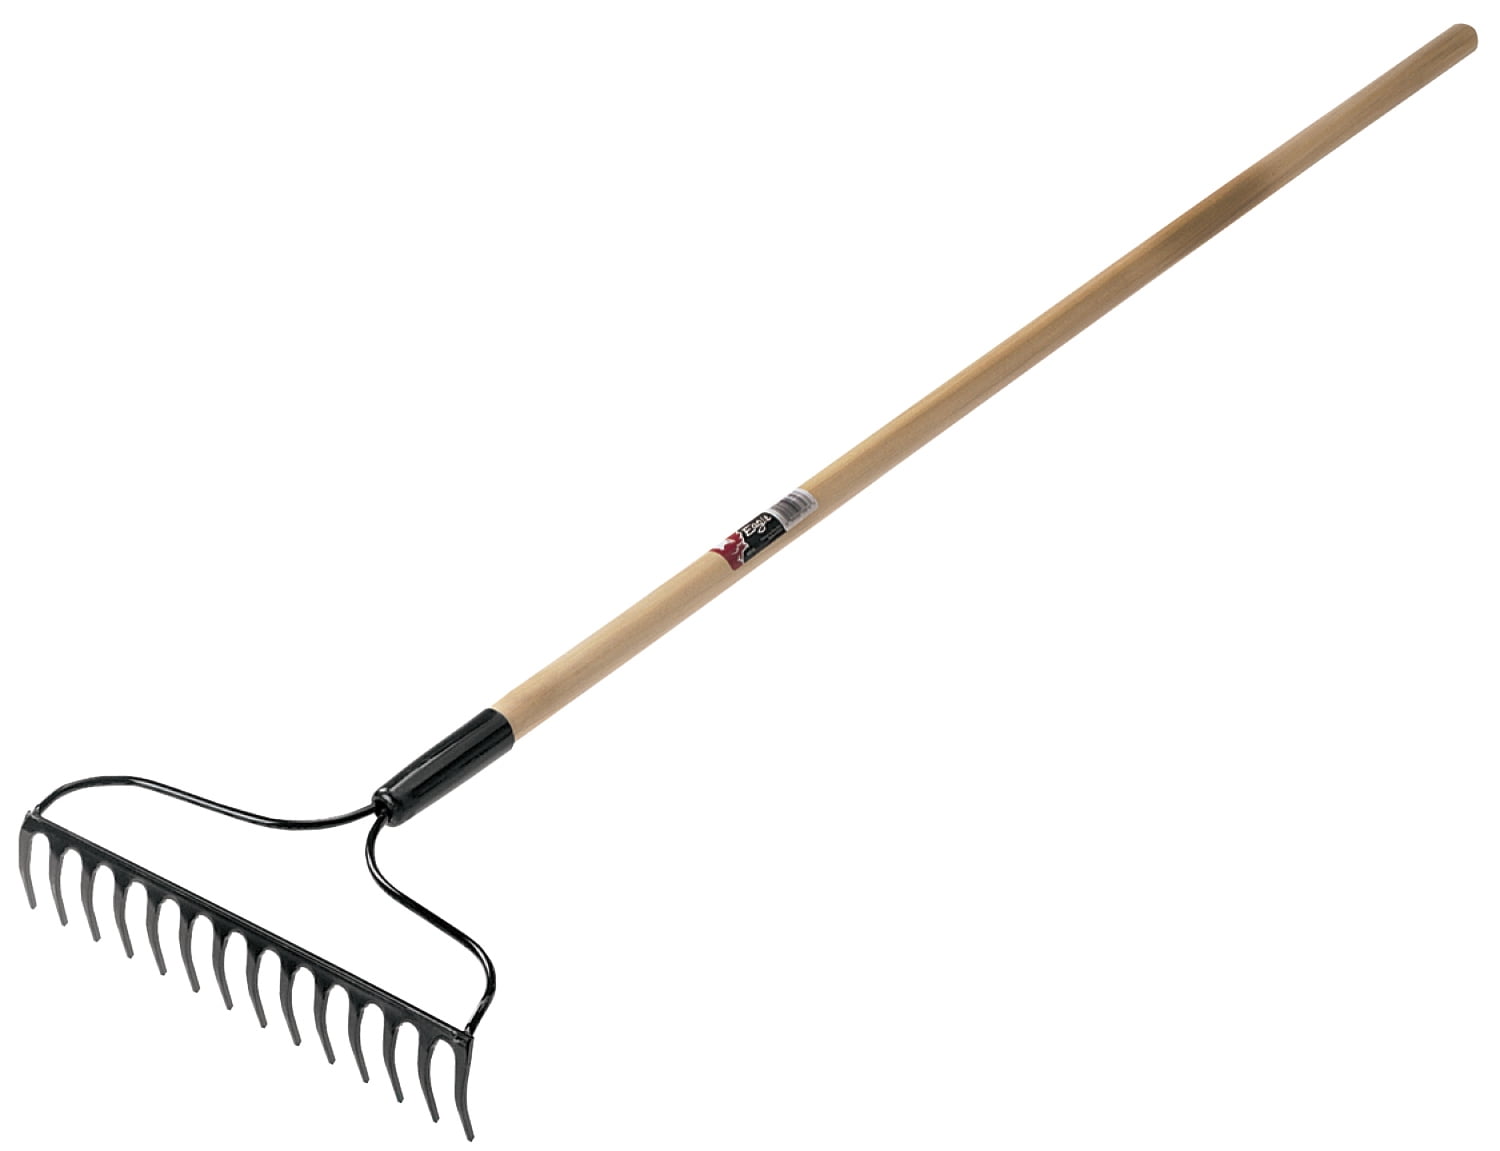 Bully Tools 92379 12-Gauge Bow Rake with Fiberglass Handle and 16 inch Steel Head 66-Inch